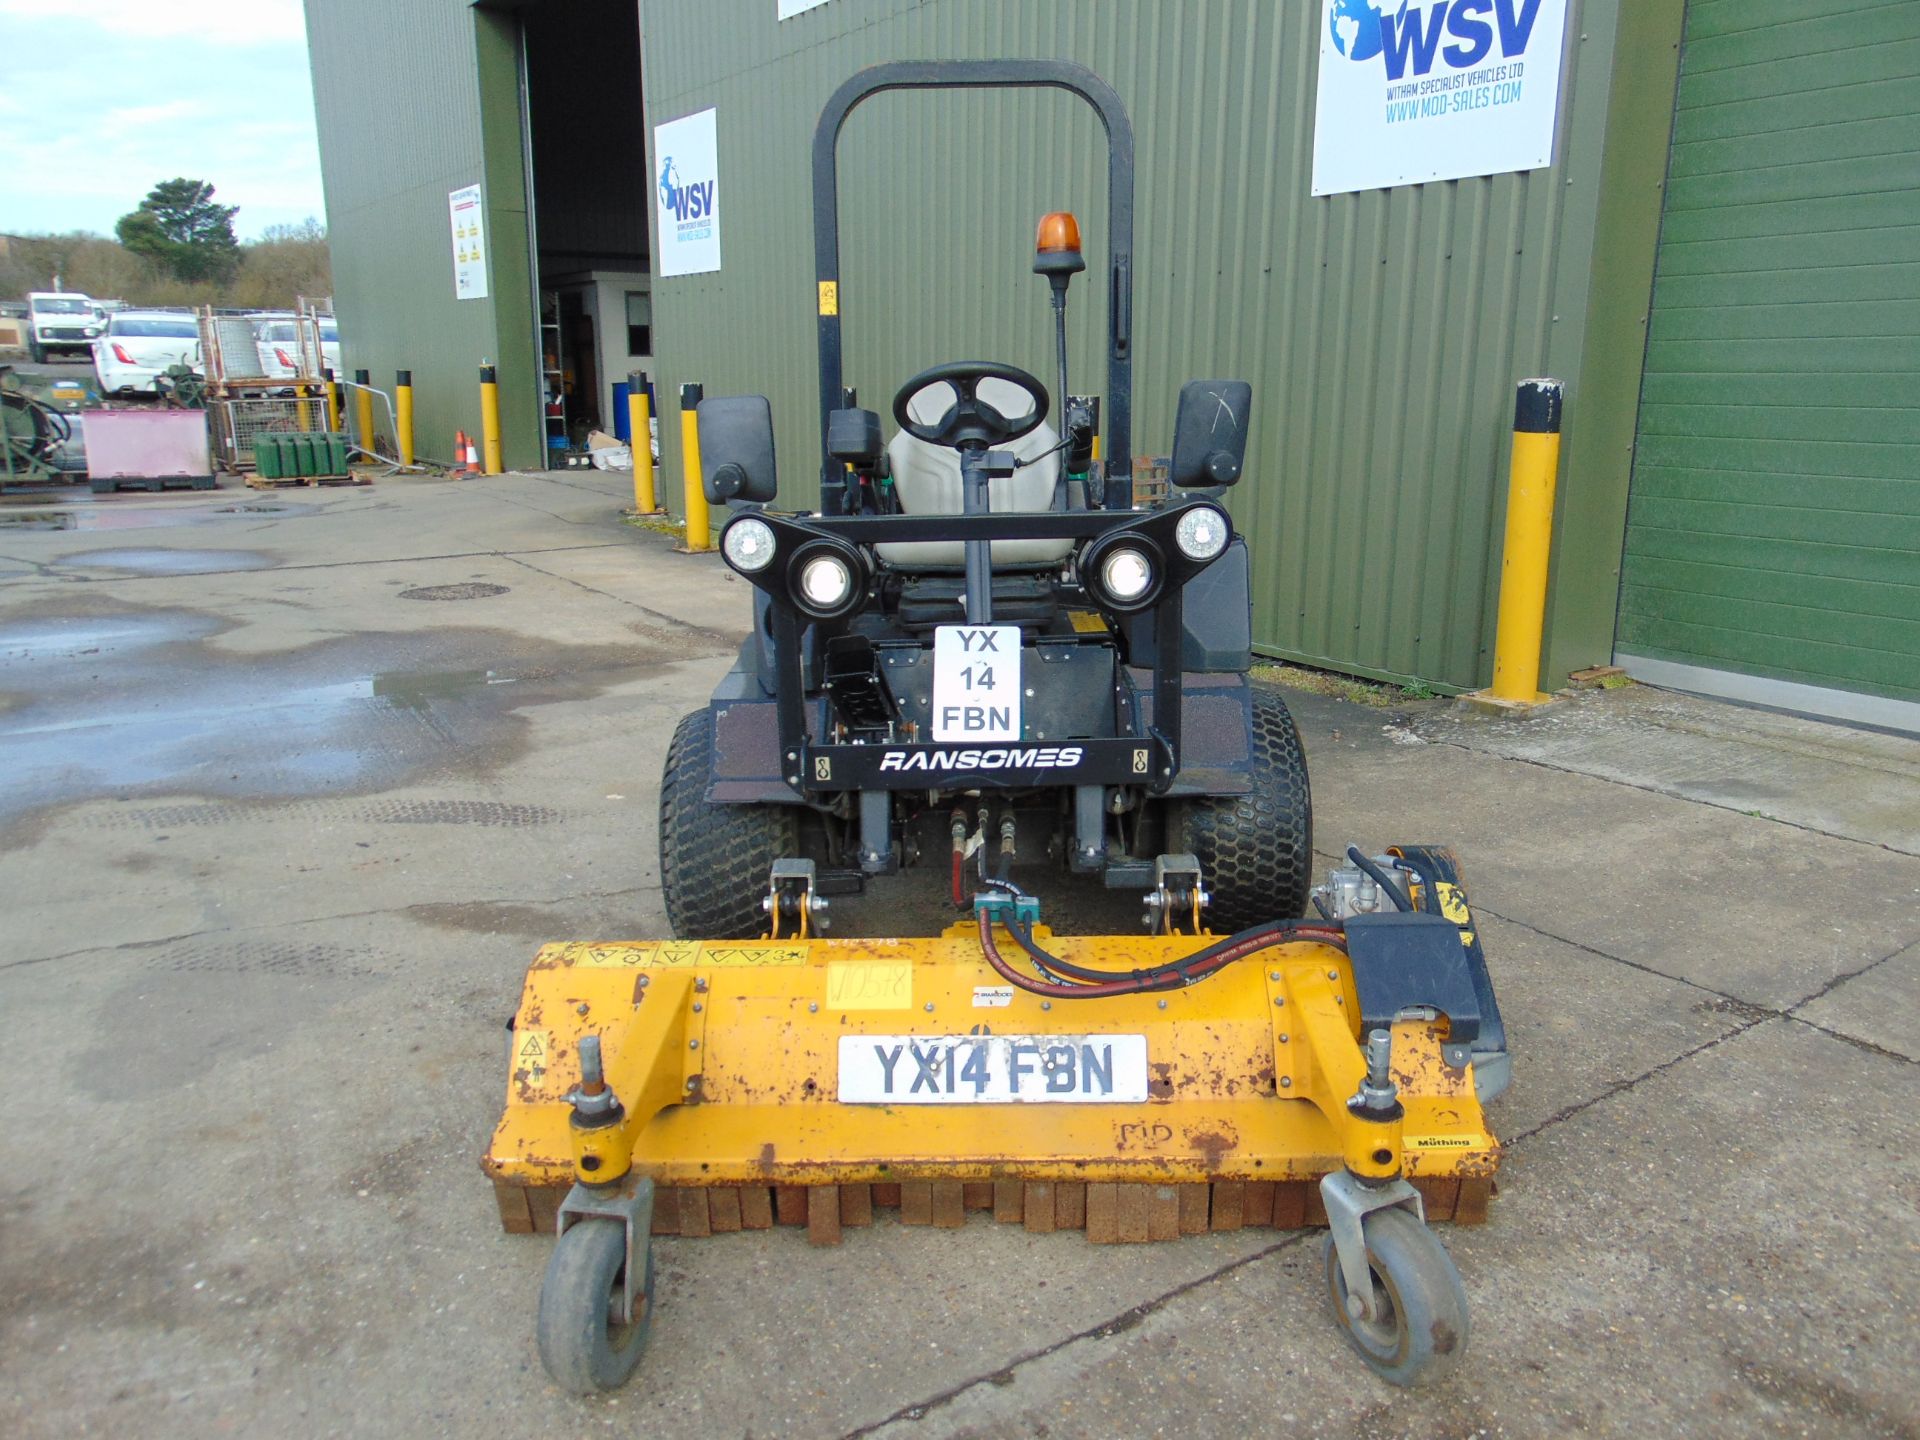 2014 Ransomes HR300 C/W Muthing Outfront Flail Mower ONLY 2,203 HOURS! - Image 3 of 26